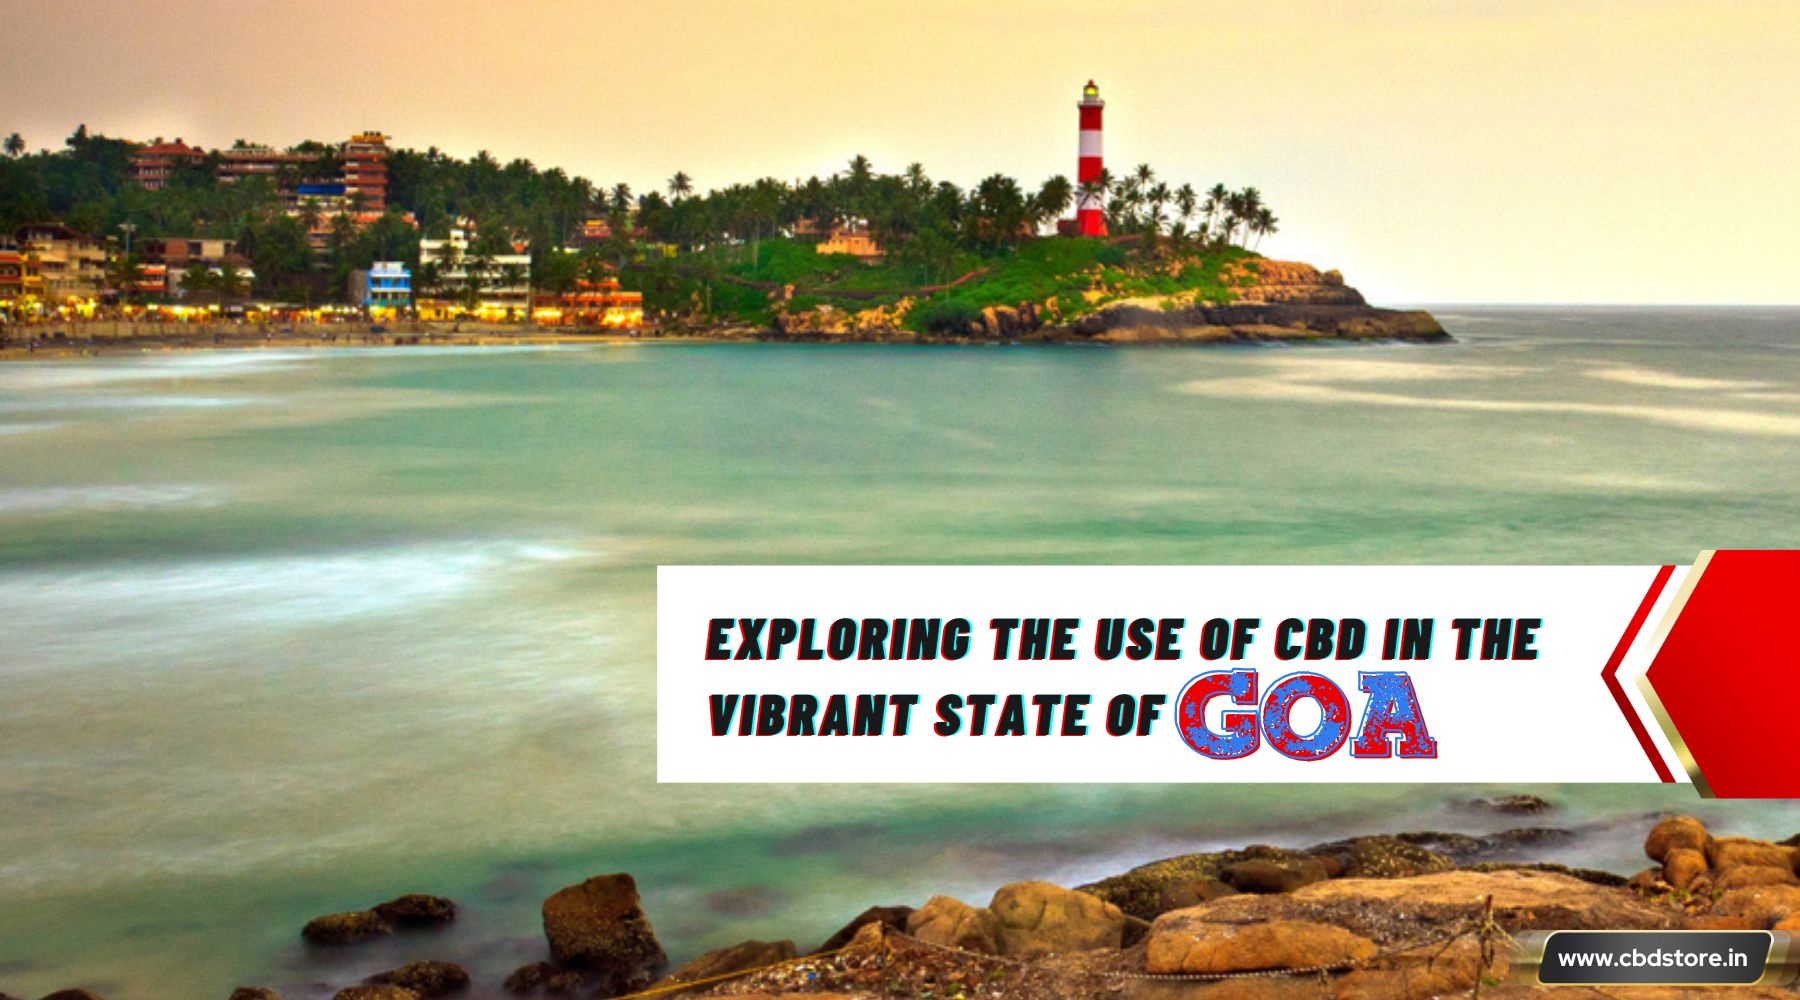 Exploring the use of CBD in the vibrant state of Goa - CBD Store India